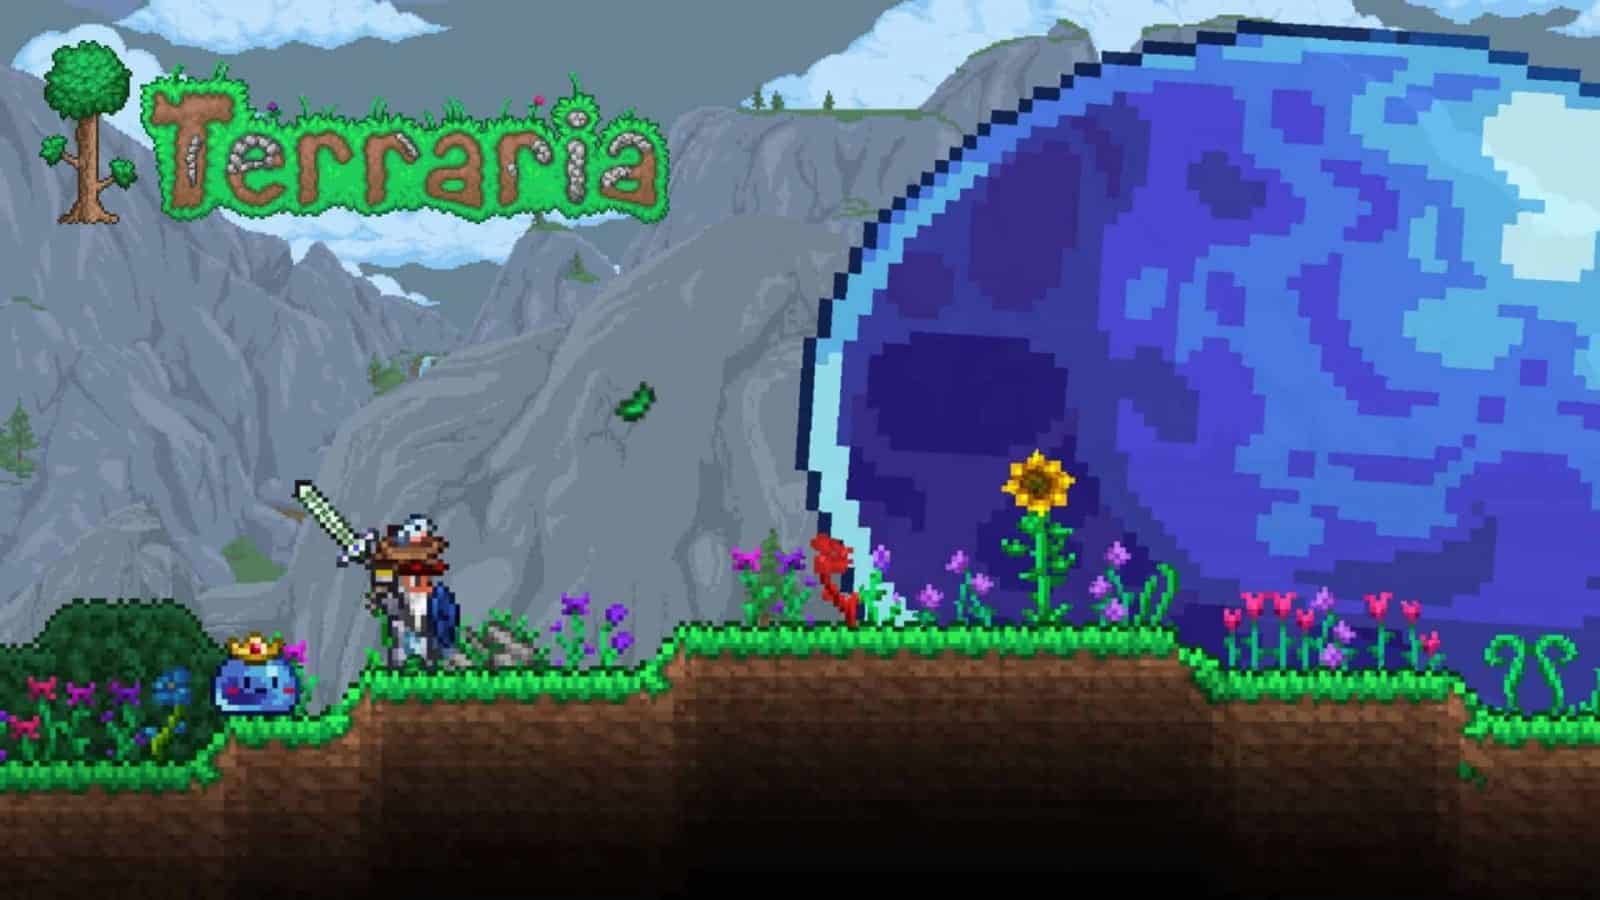 How to Setup Terraria Crossplay for PC and Mobile Edition